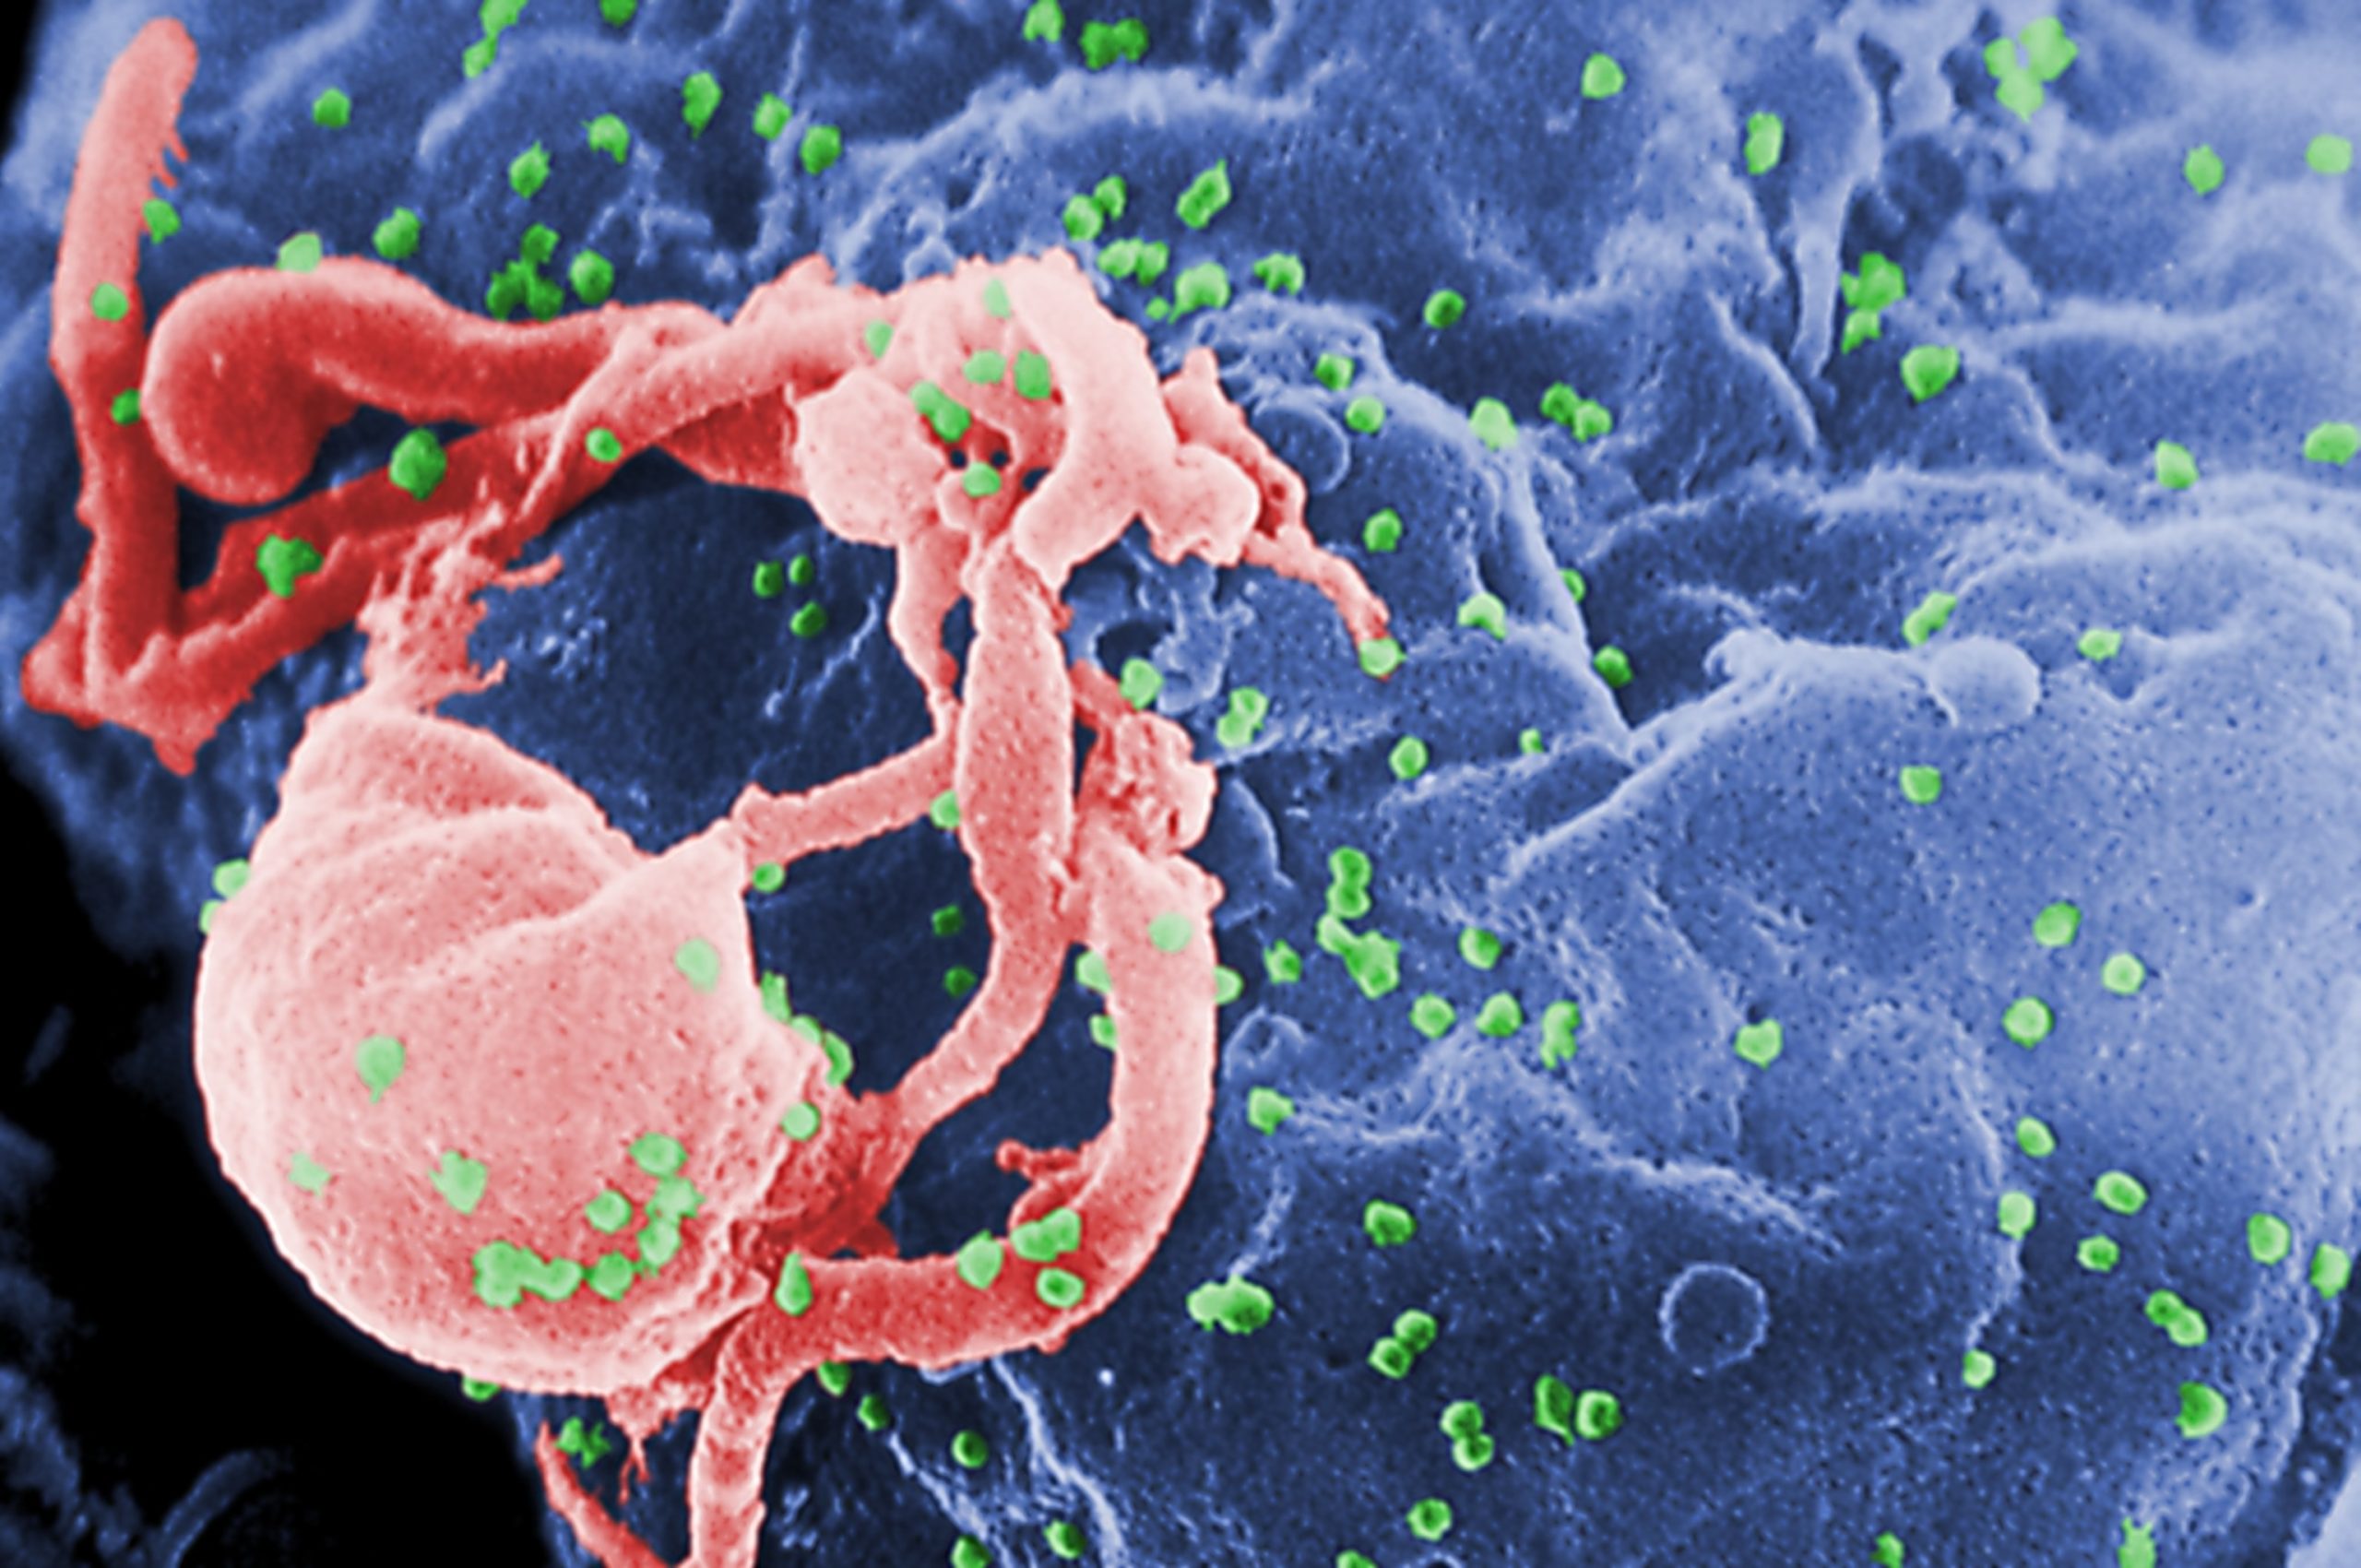 Study finds that 4 children achieve over a year of HIV remission following treatment pause